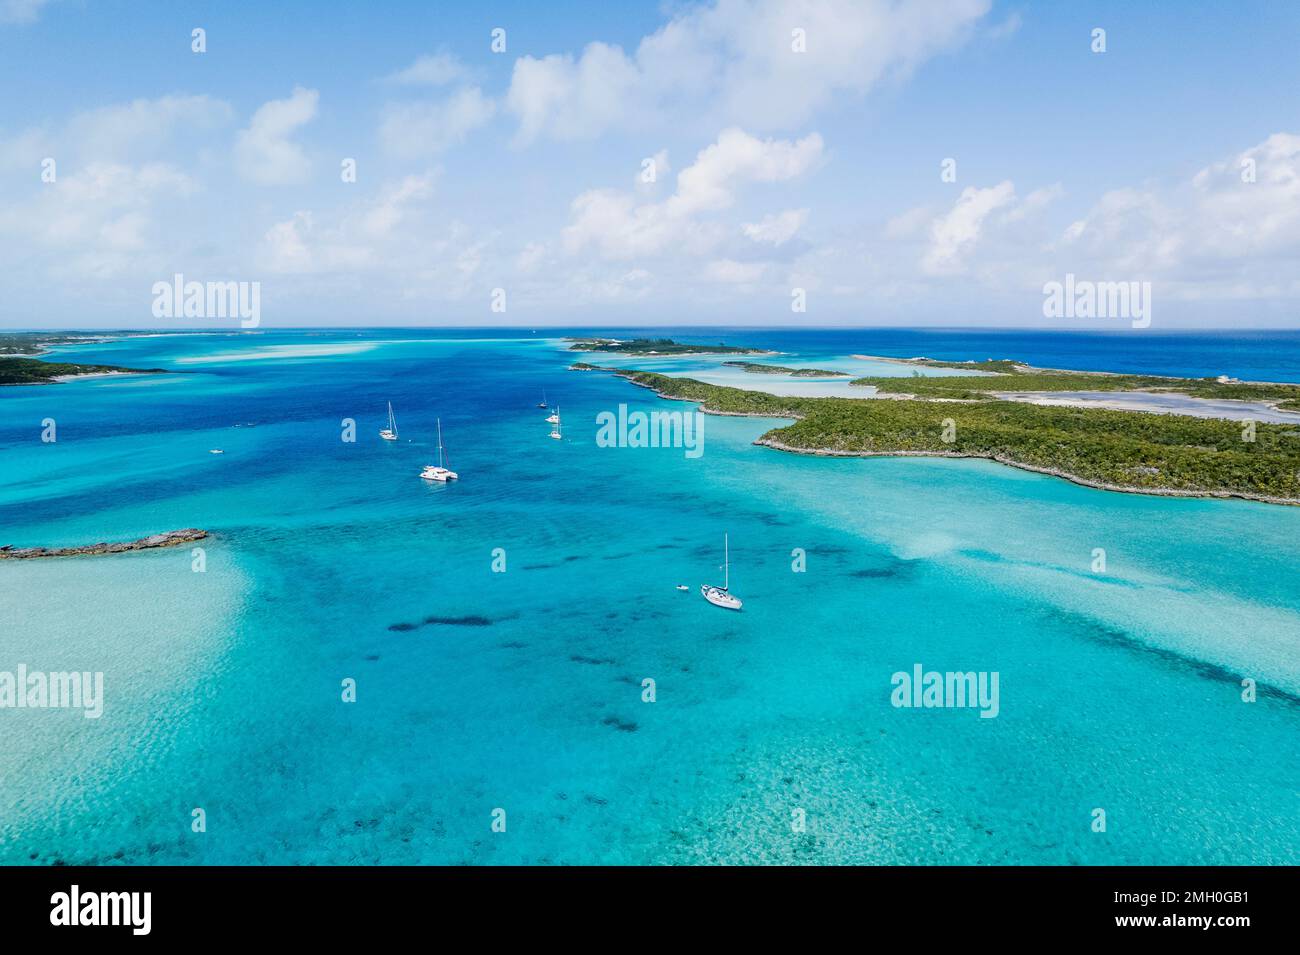 Aerial of Sailboats Anchored in Turquoise Water Between Islands Stock Photo